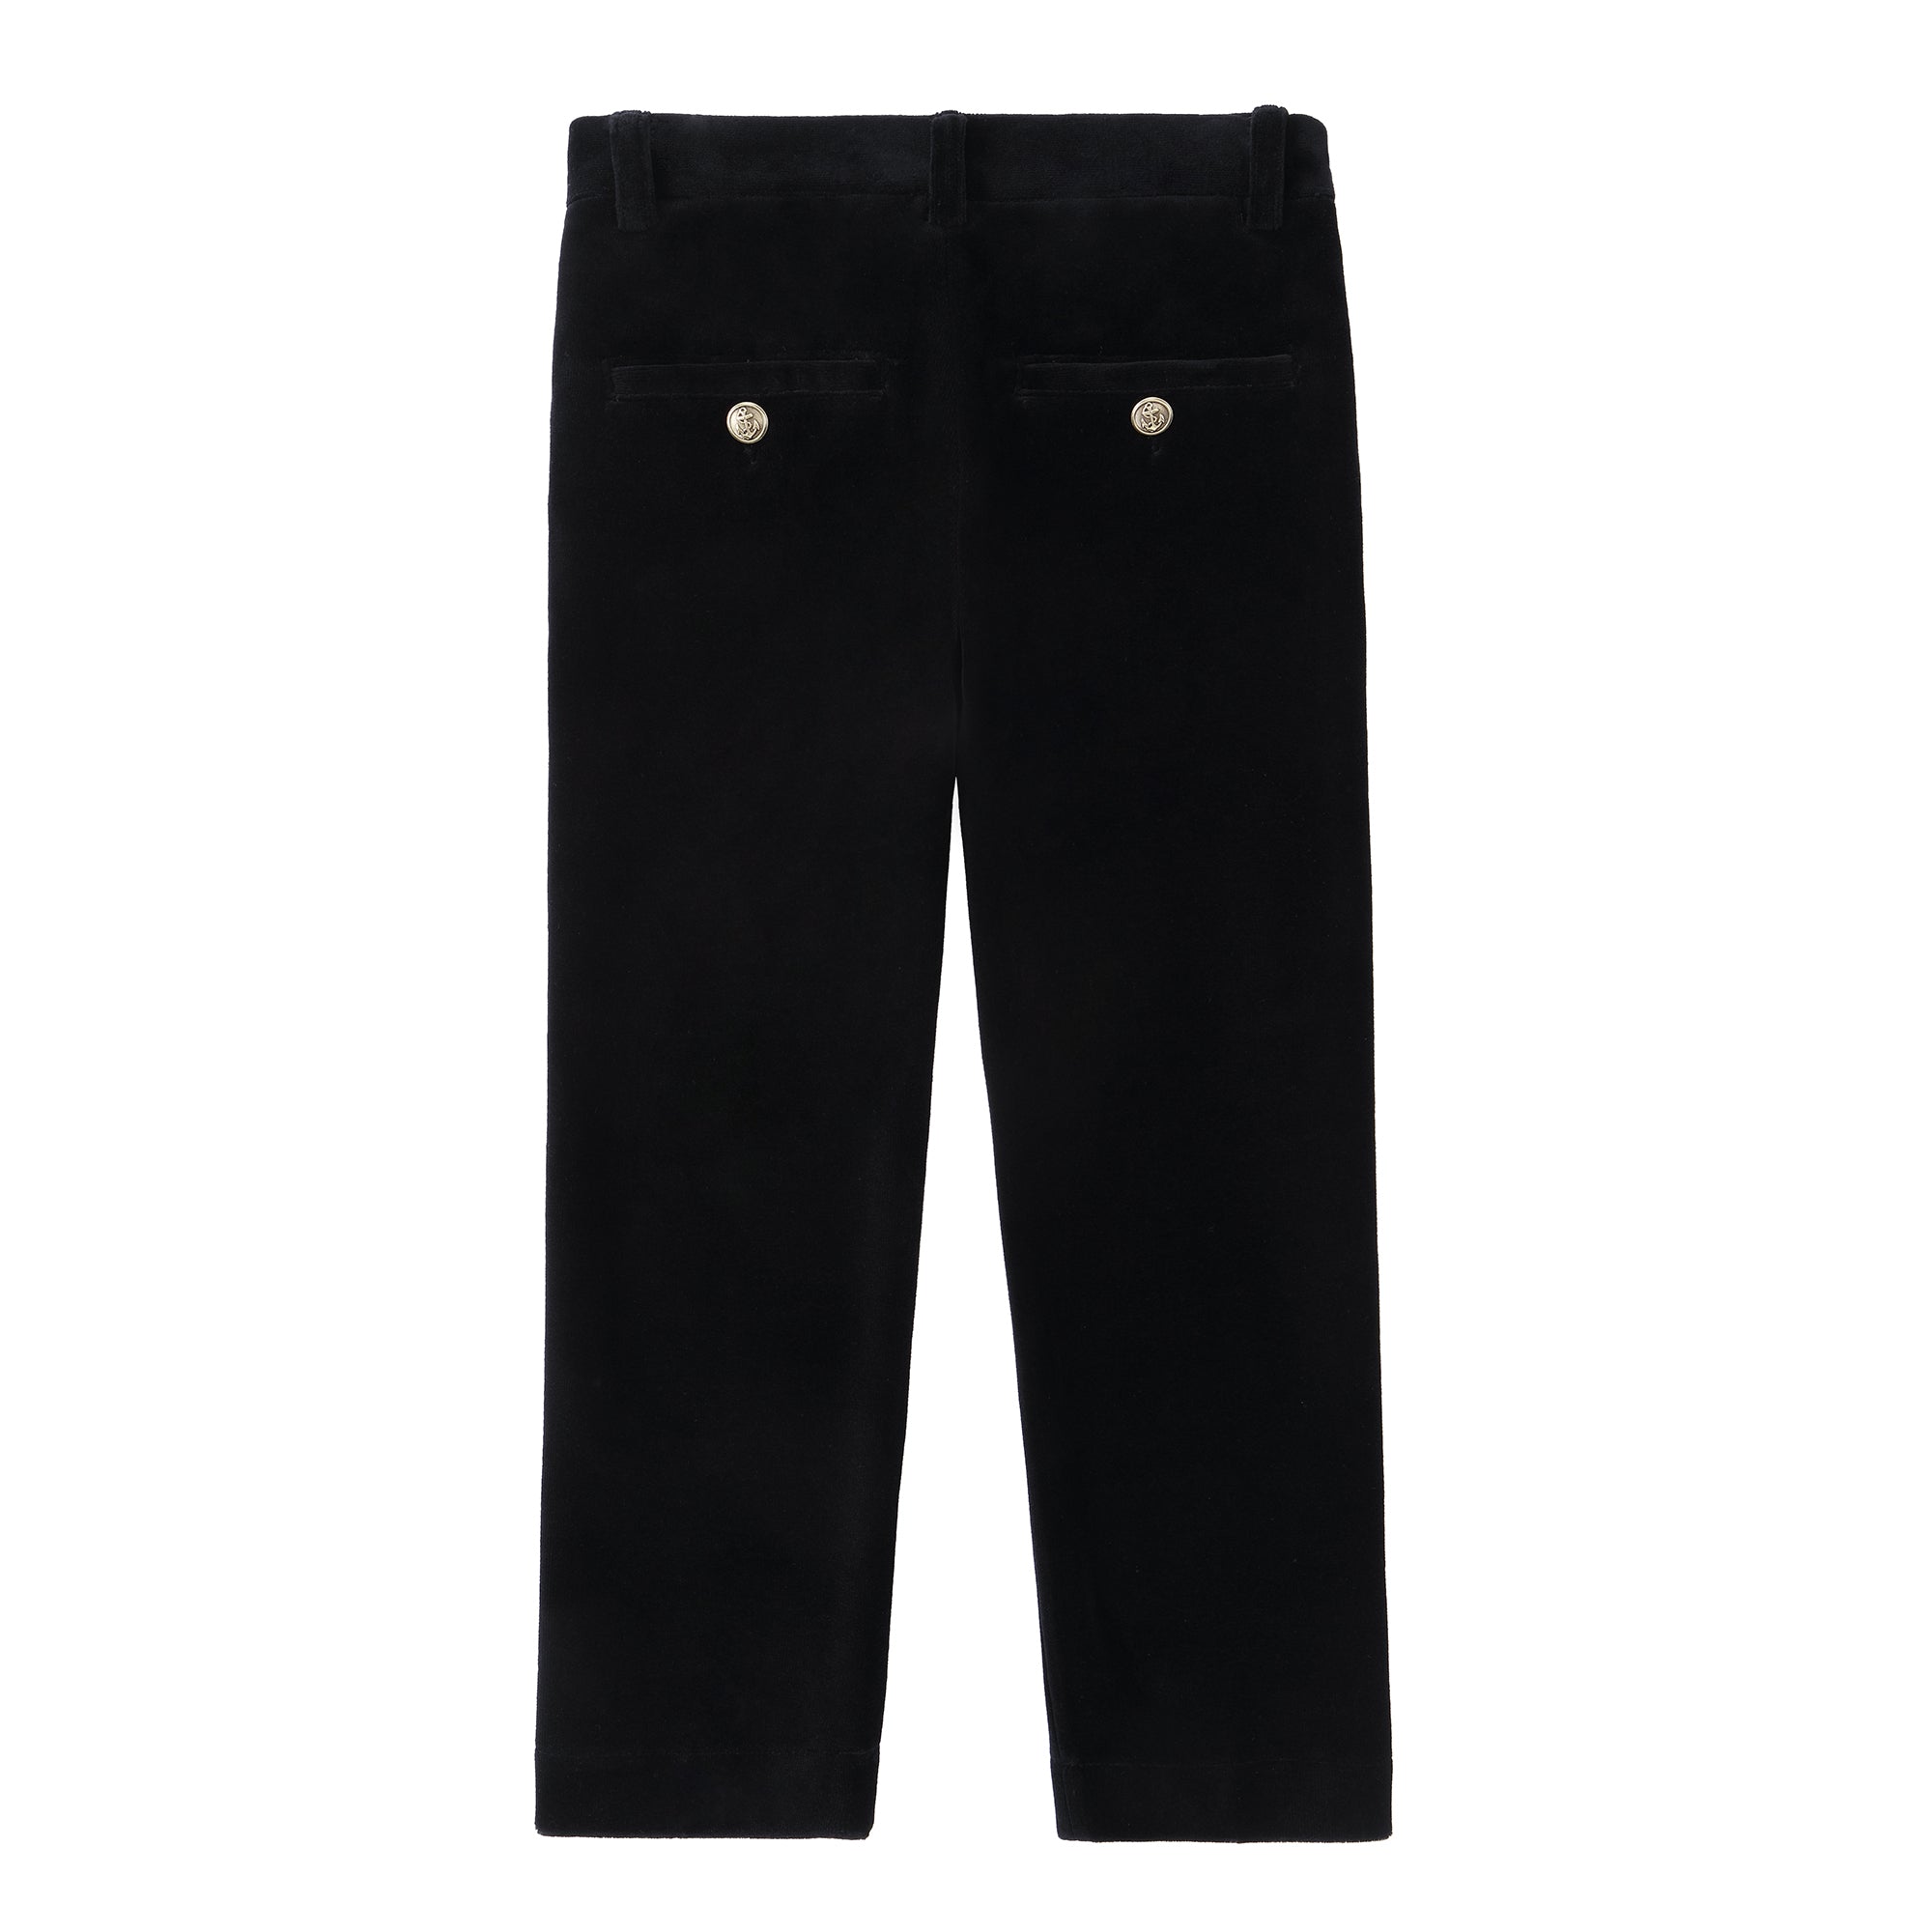 Black Velvet Pants With Gold Buttons